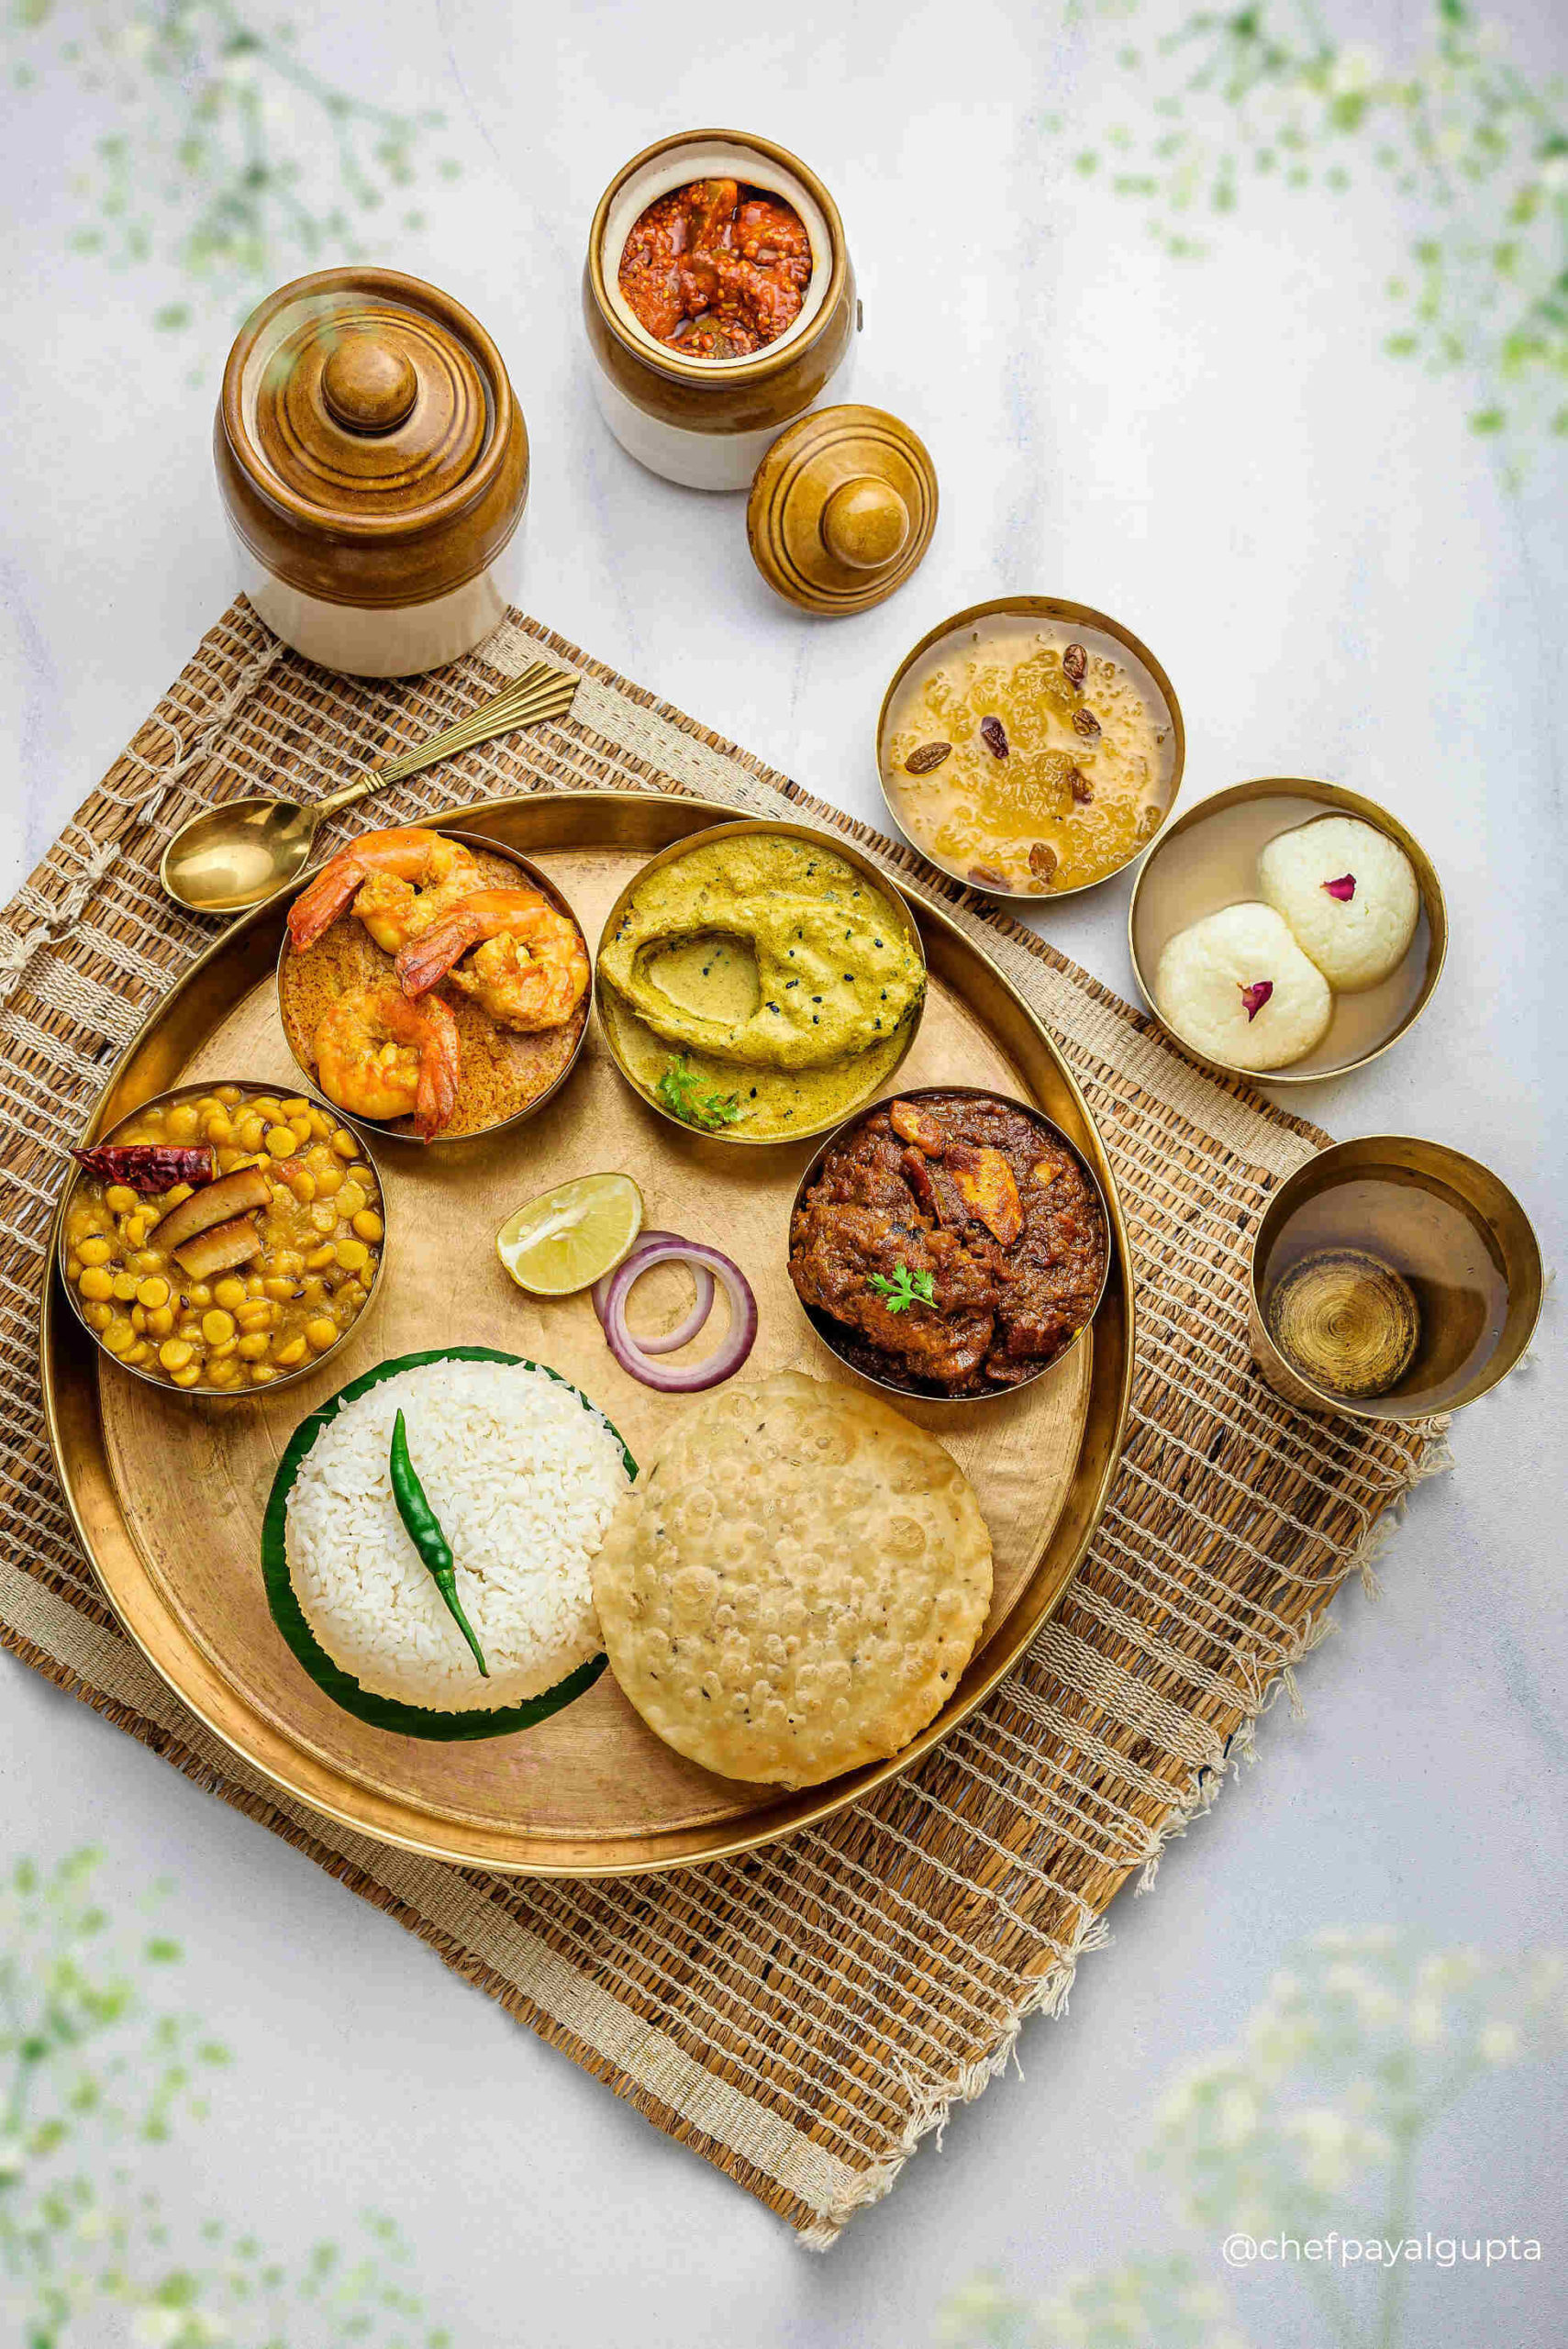 Non-veg bengali meals, durga puja meals, types of dishes in bengali thalifood photography